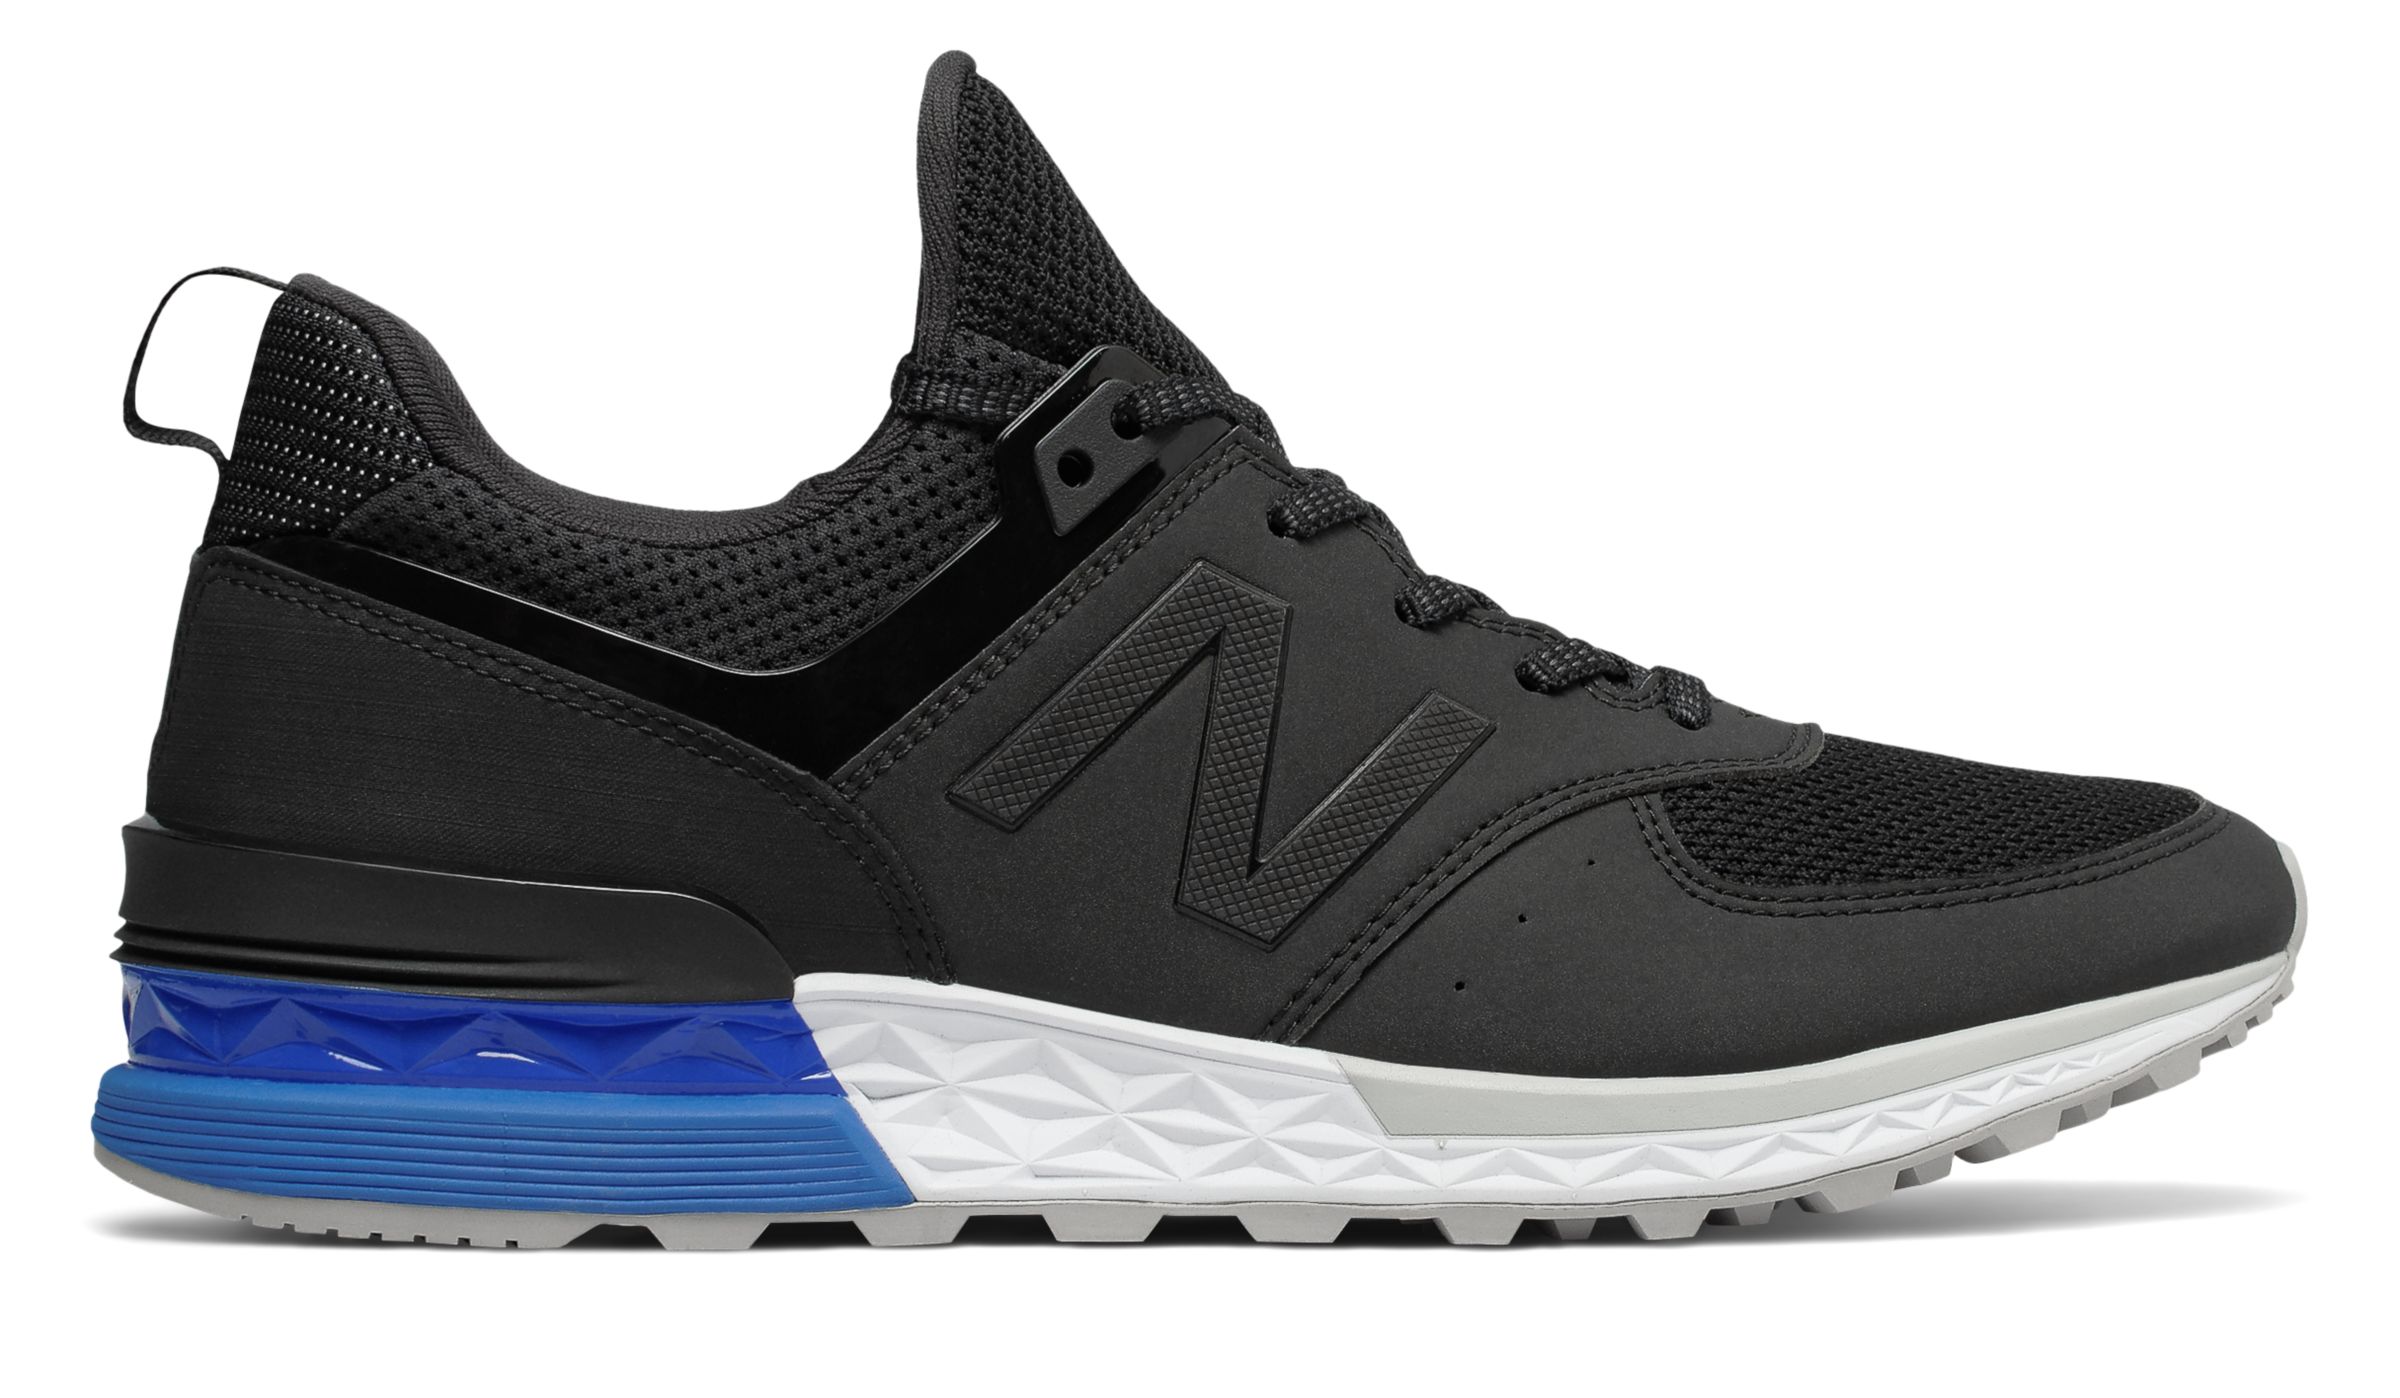 New Balance MS574-V2SP on Sale - Discounts Up to 59% Off on MS574SCS at  Joe's New Balance Outlet